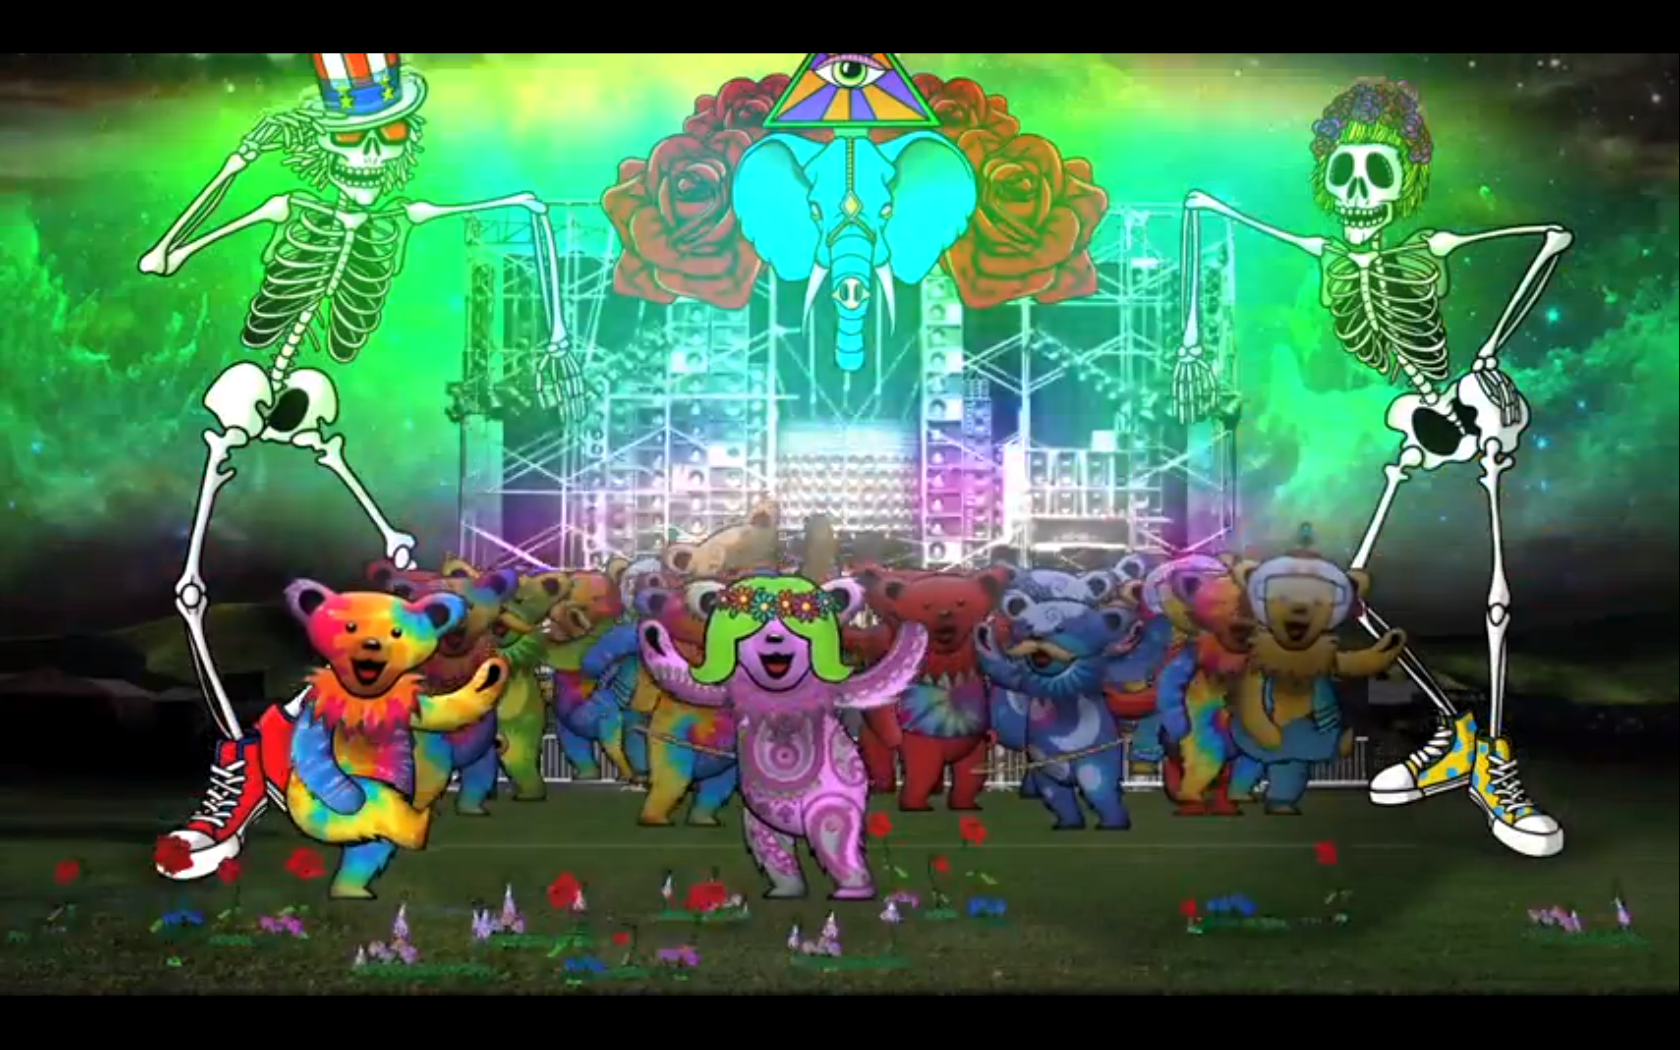 Grateful Dead get their own video game | Consequence of Sound